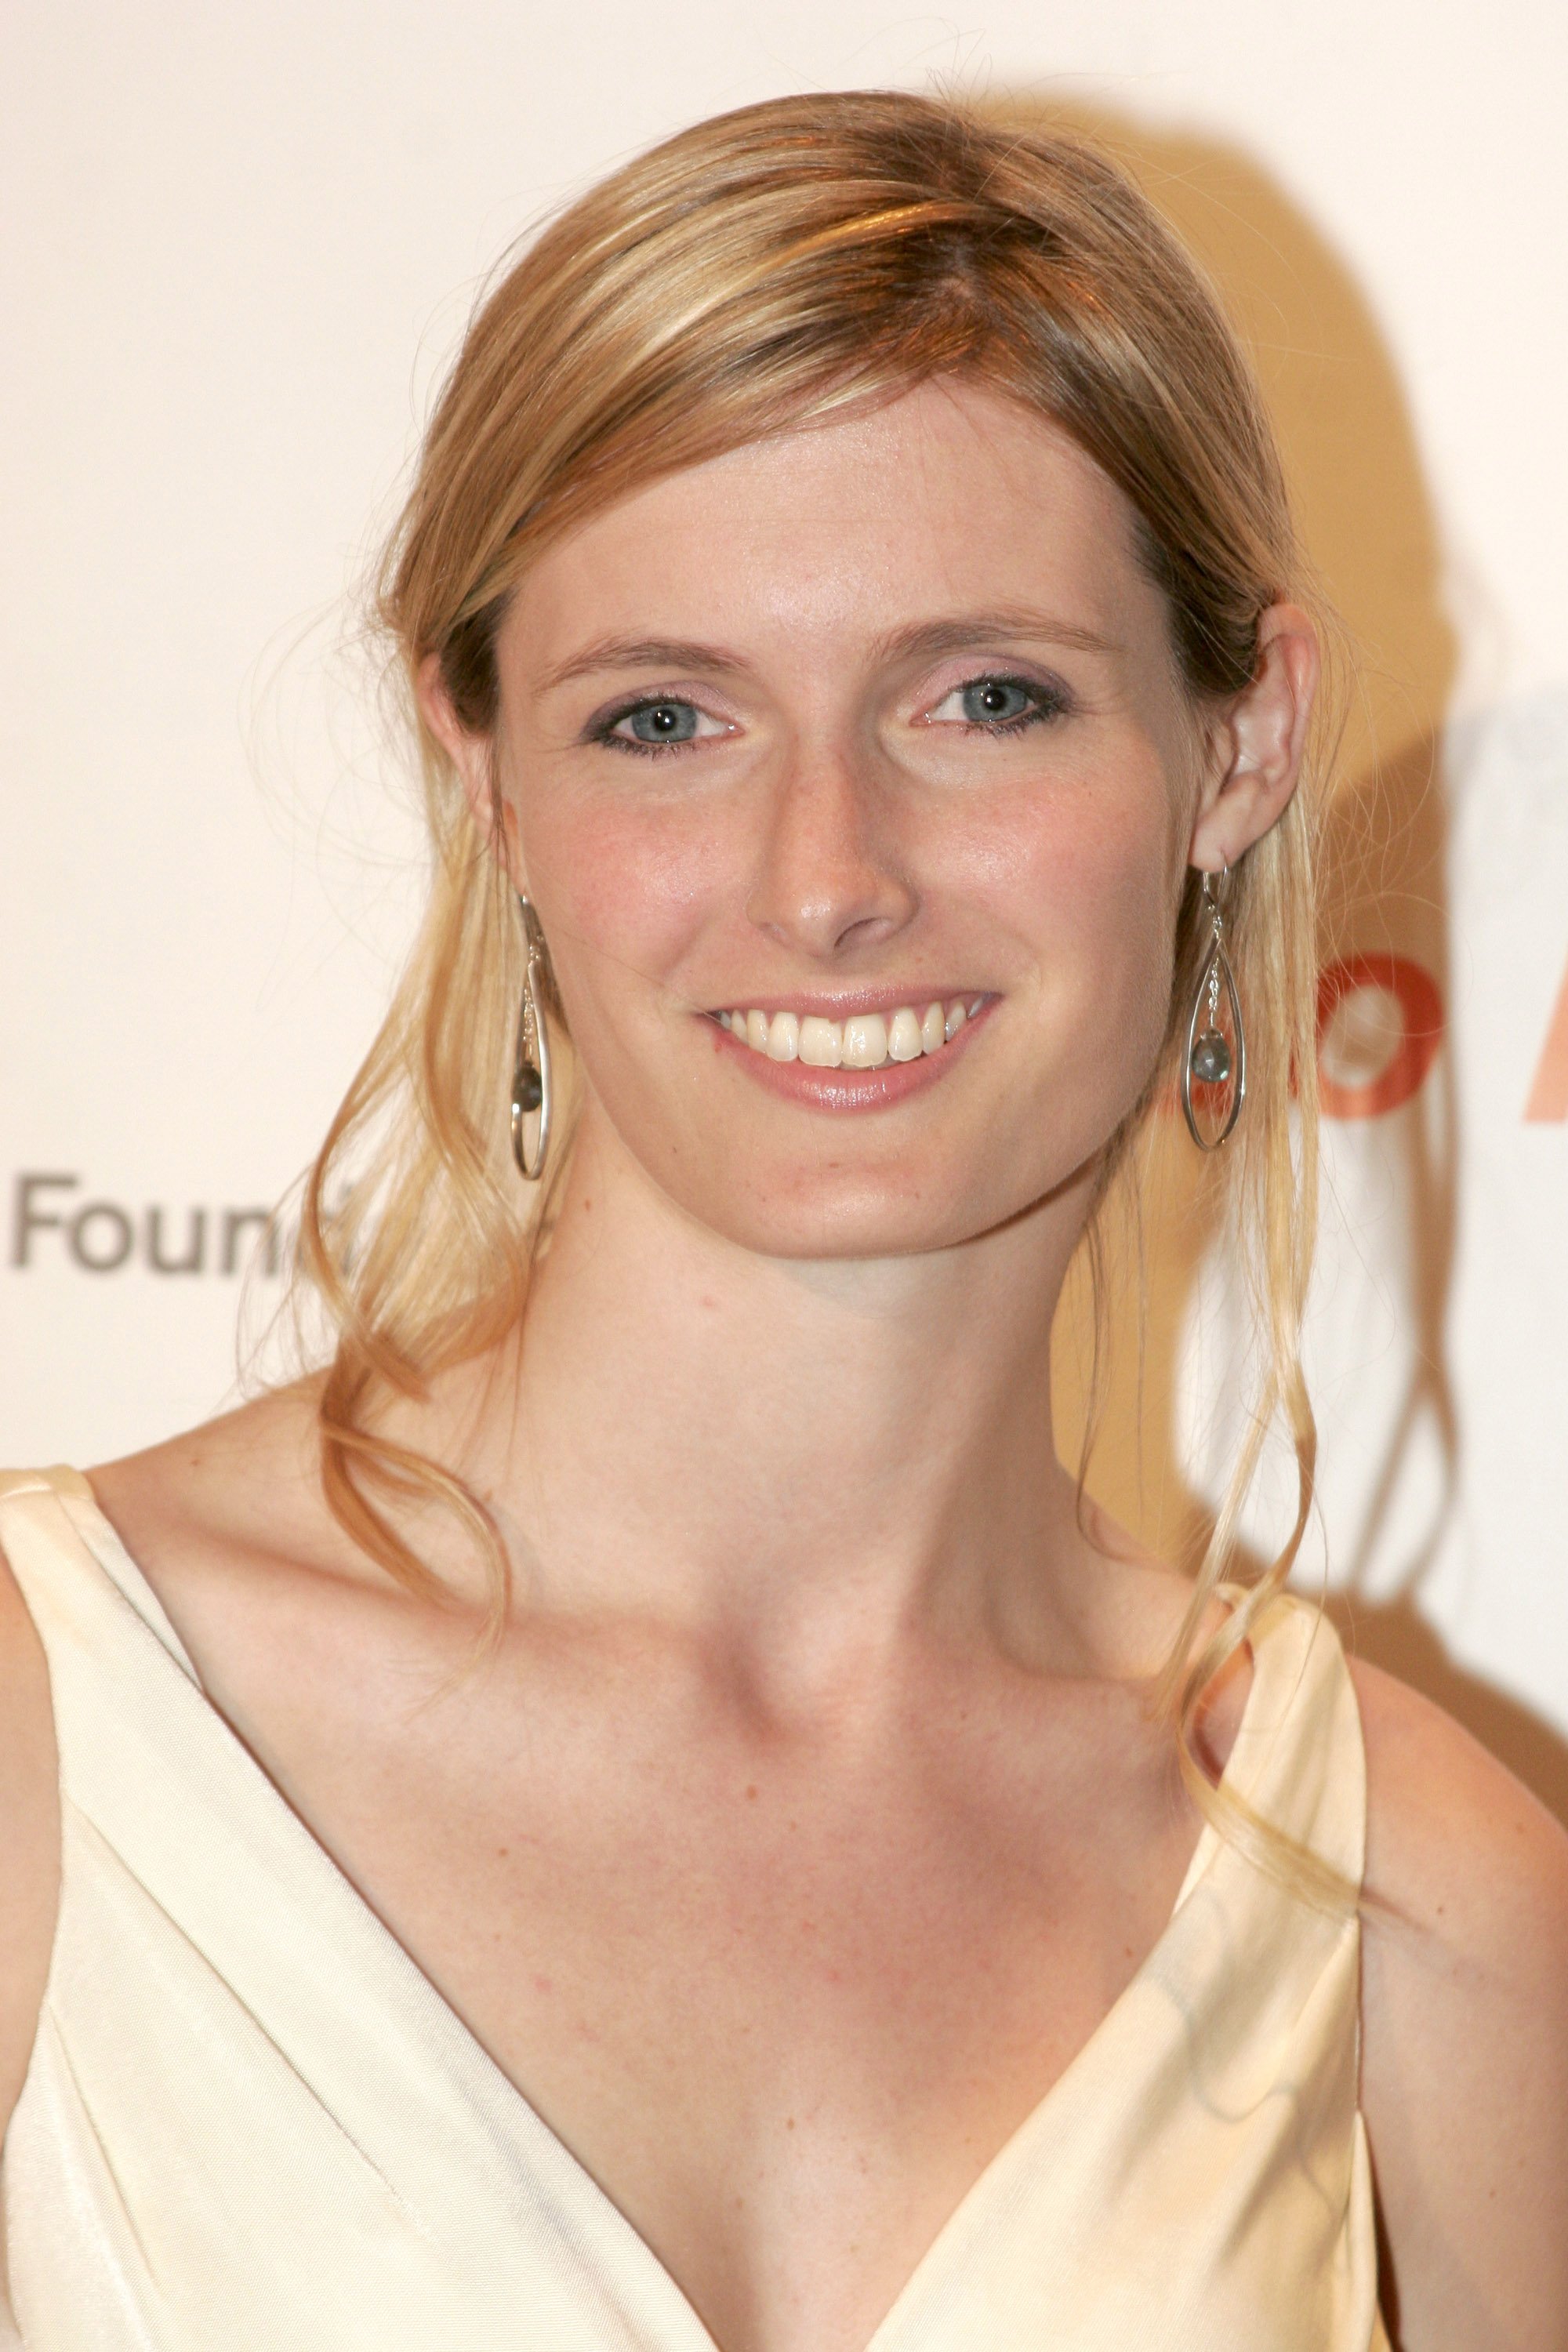 Alexandra Reeve at the Christopher Reeve Foundation Fundraiser on September 27, 2006 | Source: Getty Images